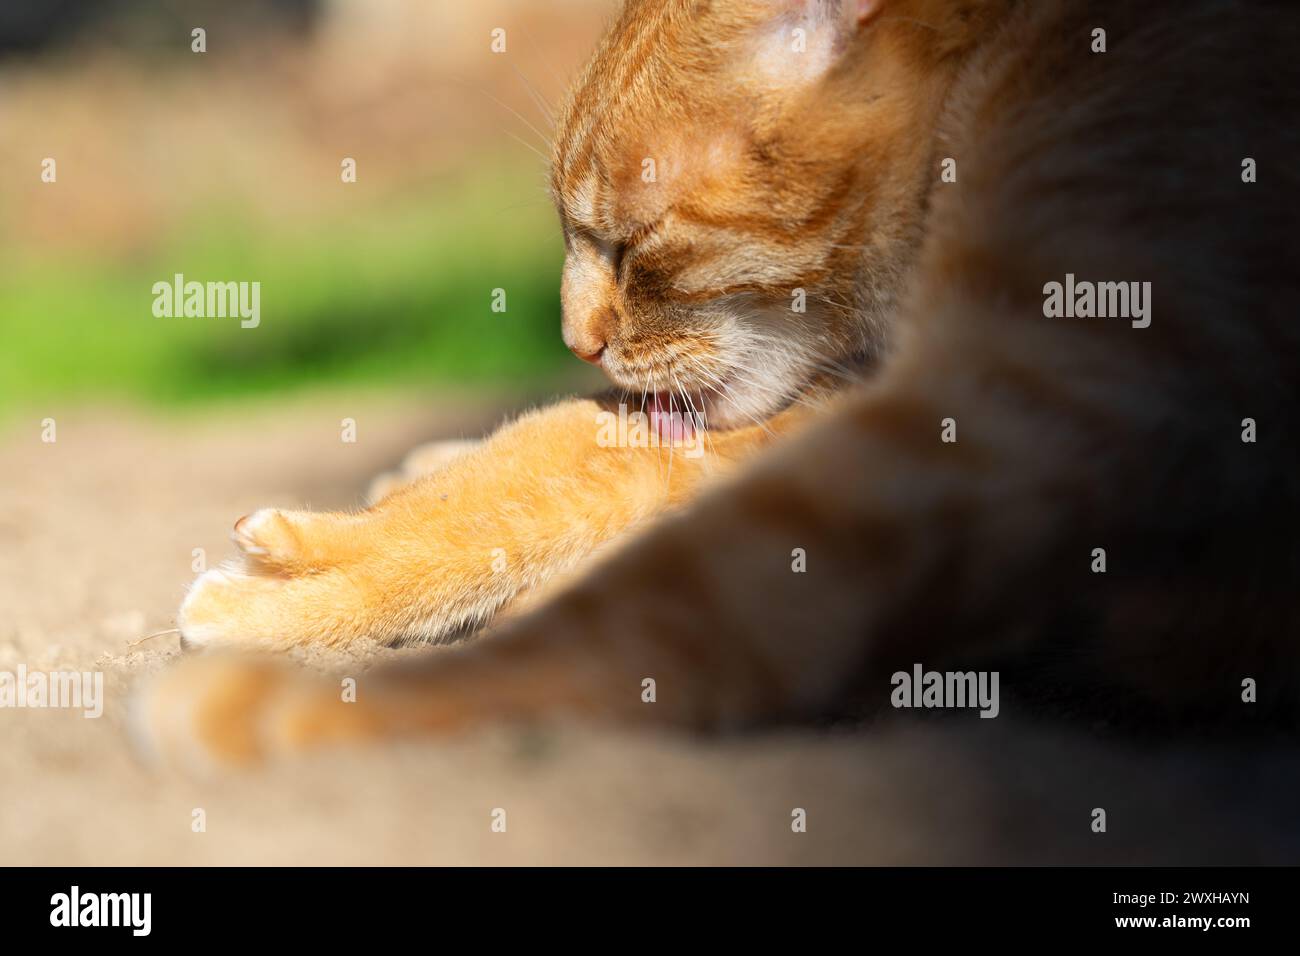 Tabby cat washing with its tongue Stock Photo